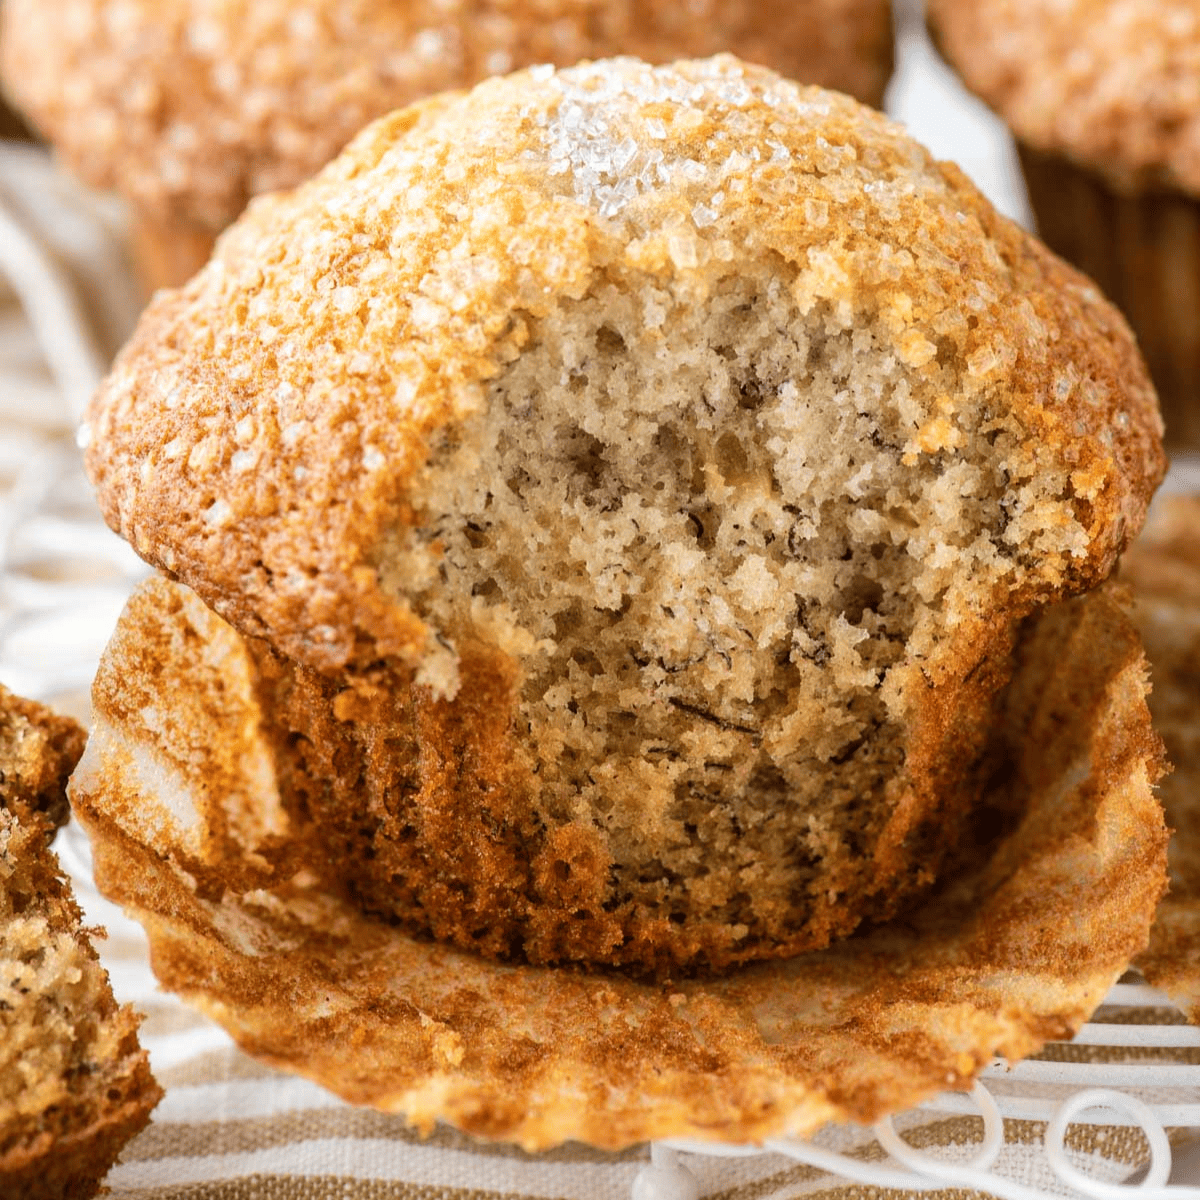 https://thefirstyearblog.com/wp-content/uploads/2019/02/Banana-Muffins-2023-Square.png